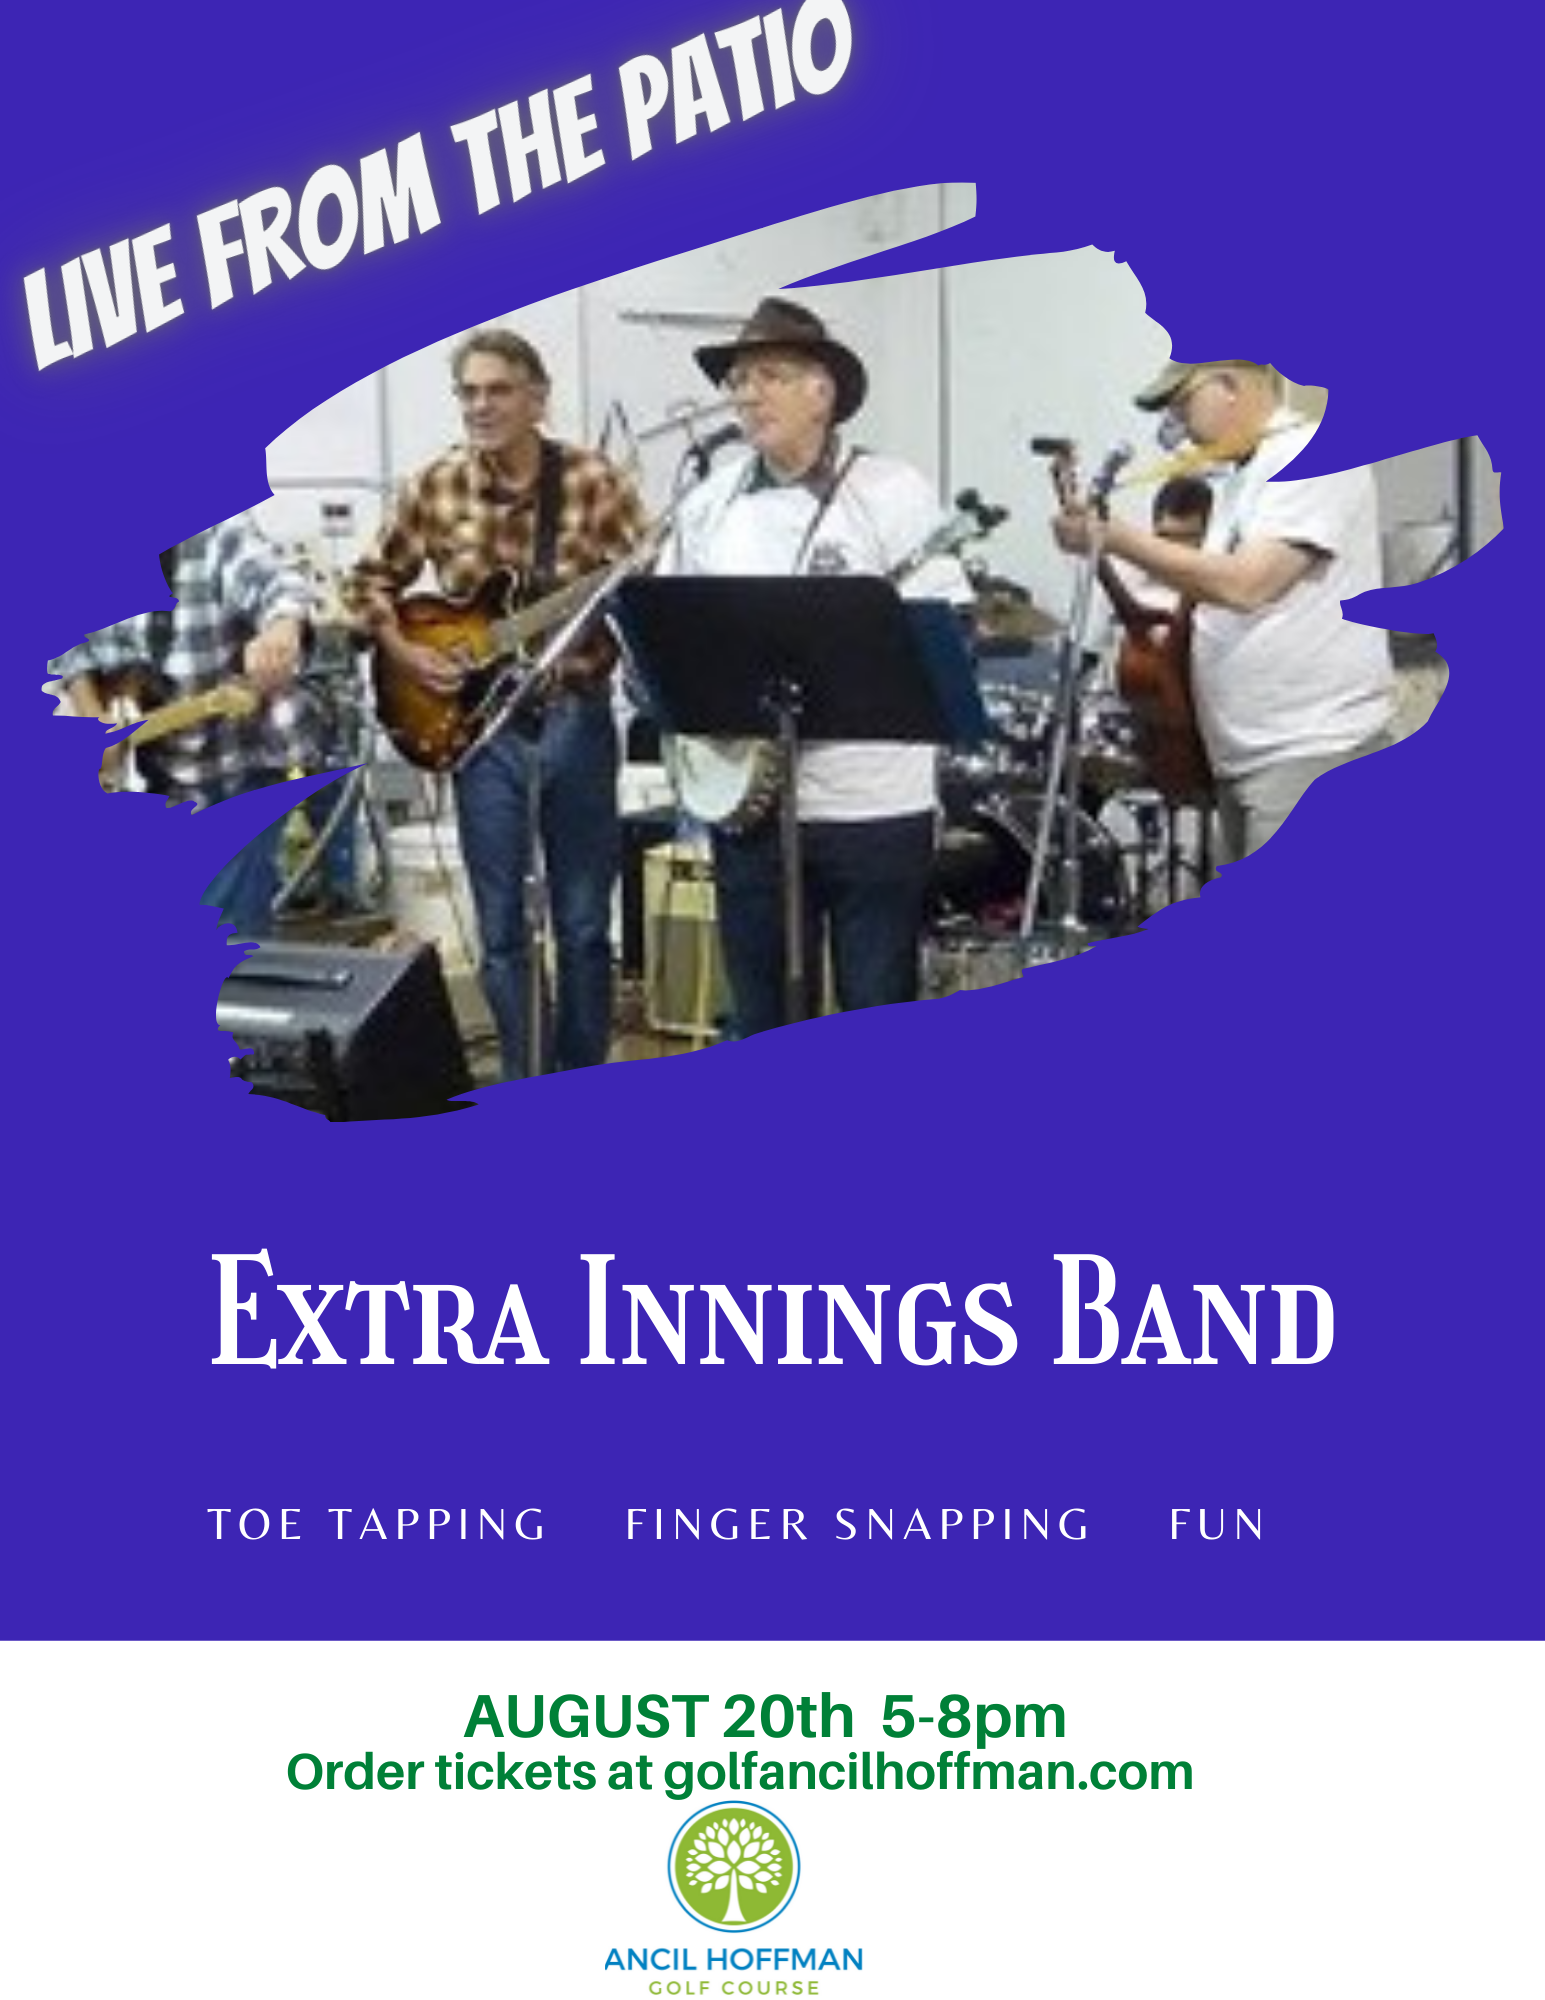 Extra Innings Band Flyer 4 2